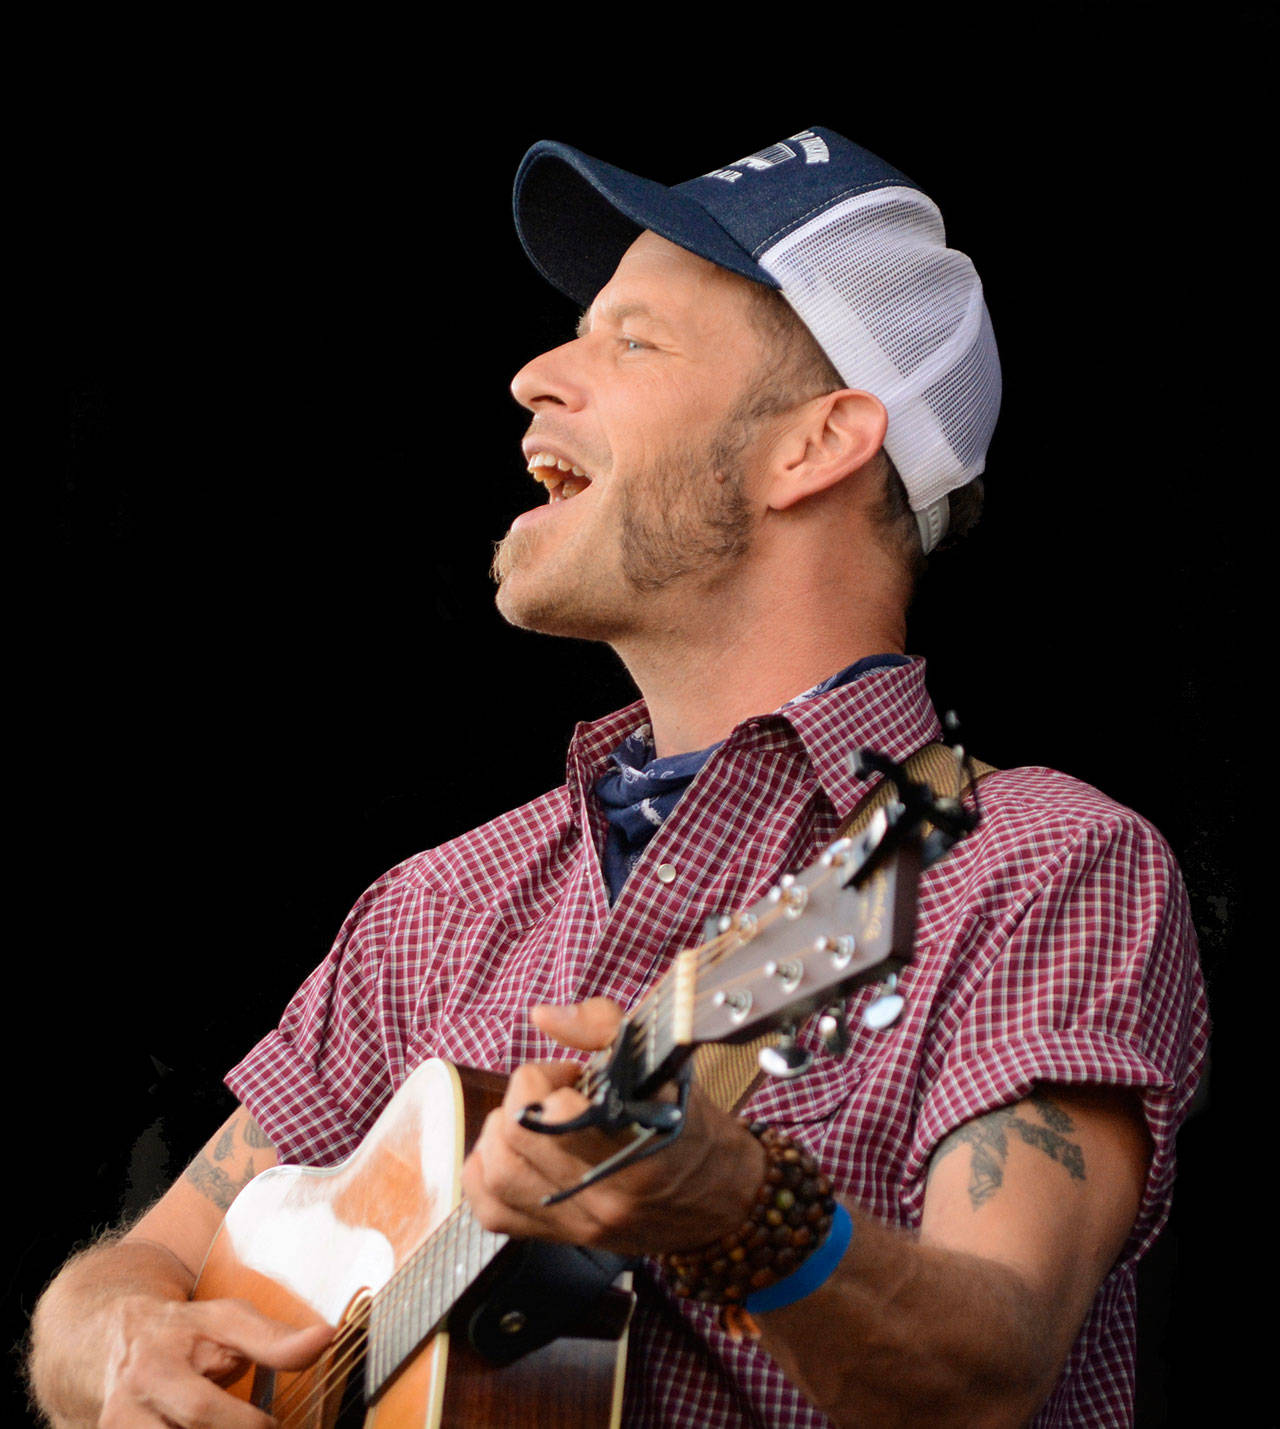 Scott Cook, a roots balladeer, will play a show presented by Debra Heesch at 7 p.m. Thursday, May 9, at Snapdragon (Donna Mair Photo).